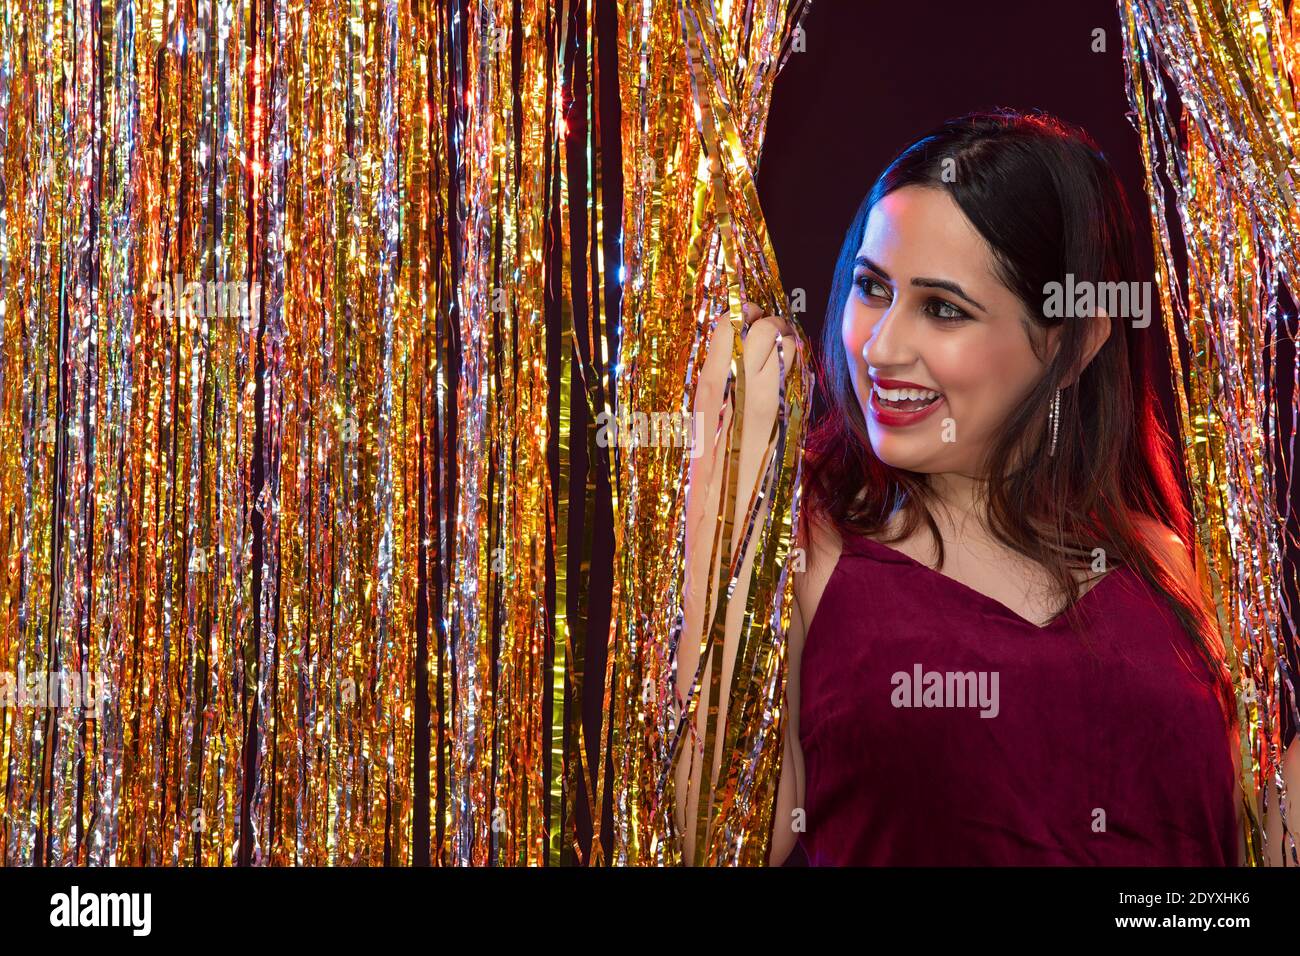 young woman celebrating the New Year party Stock Photo